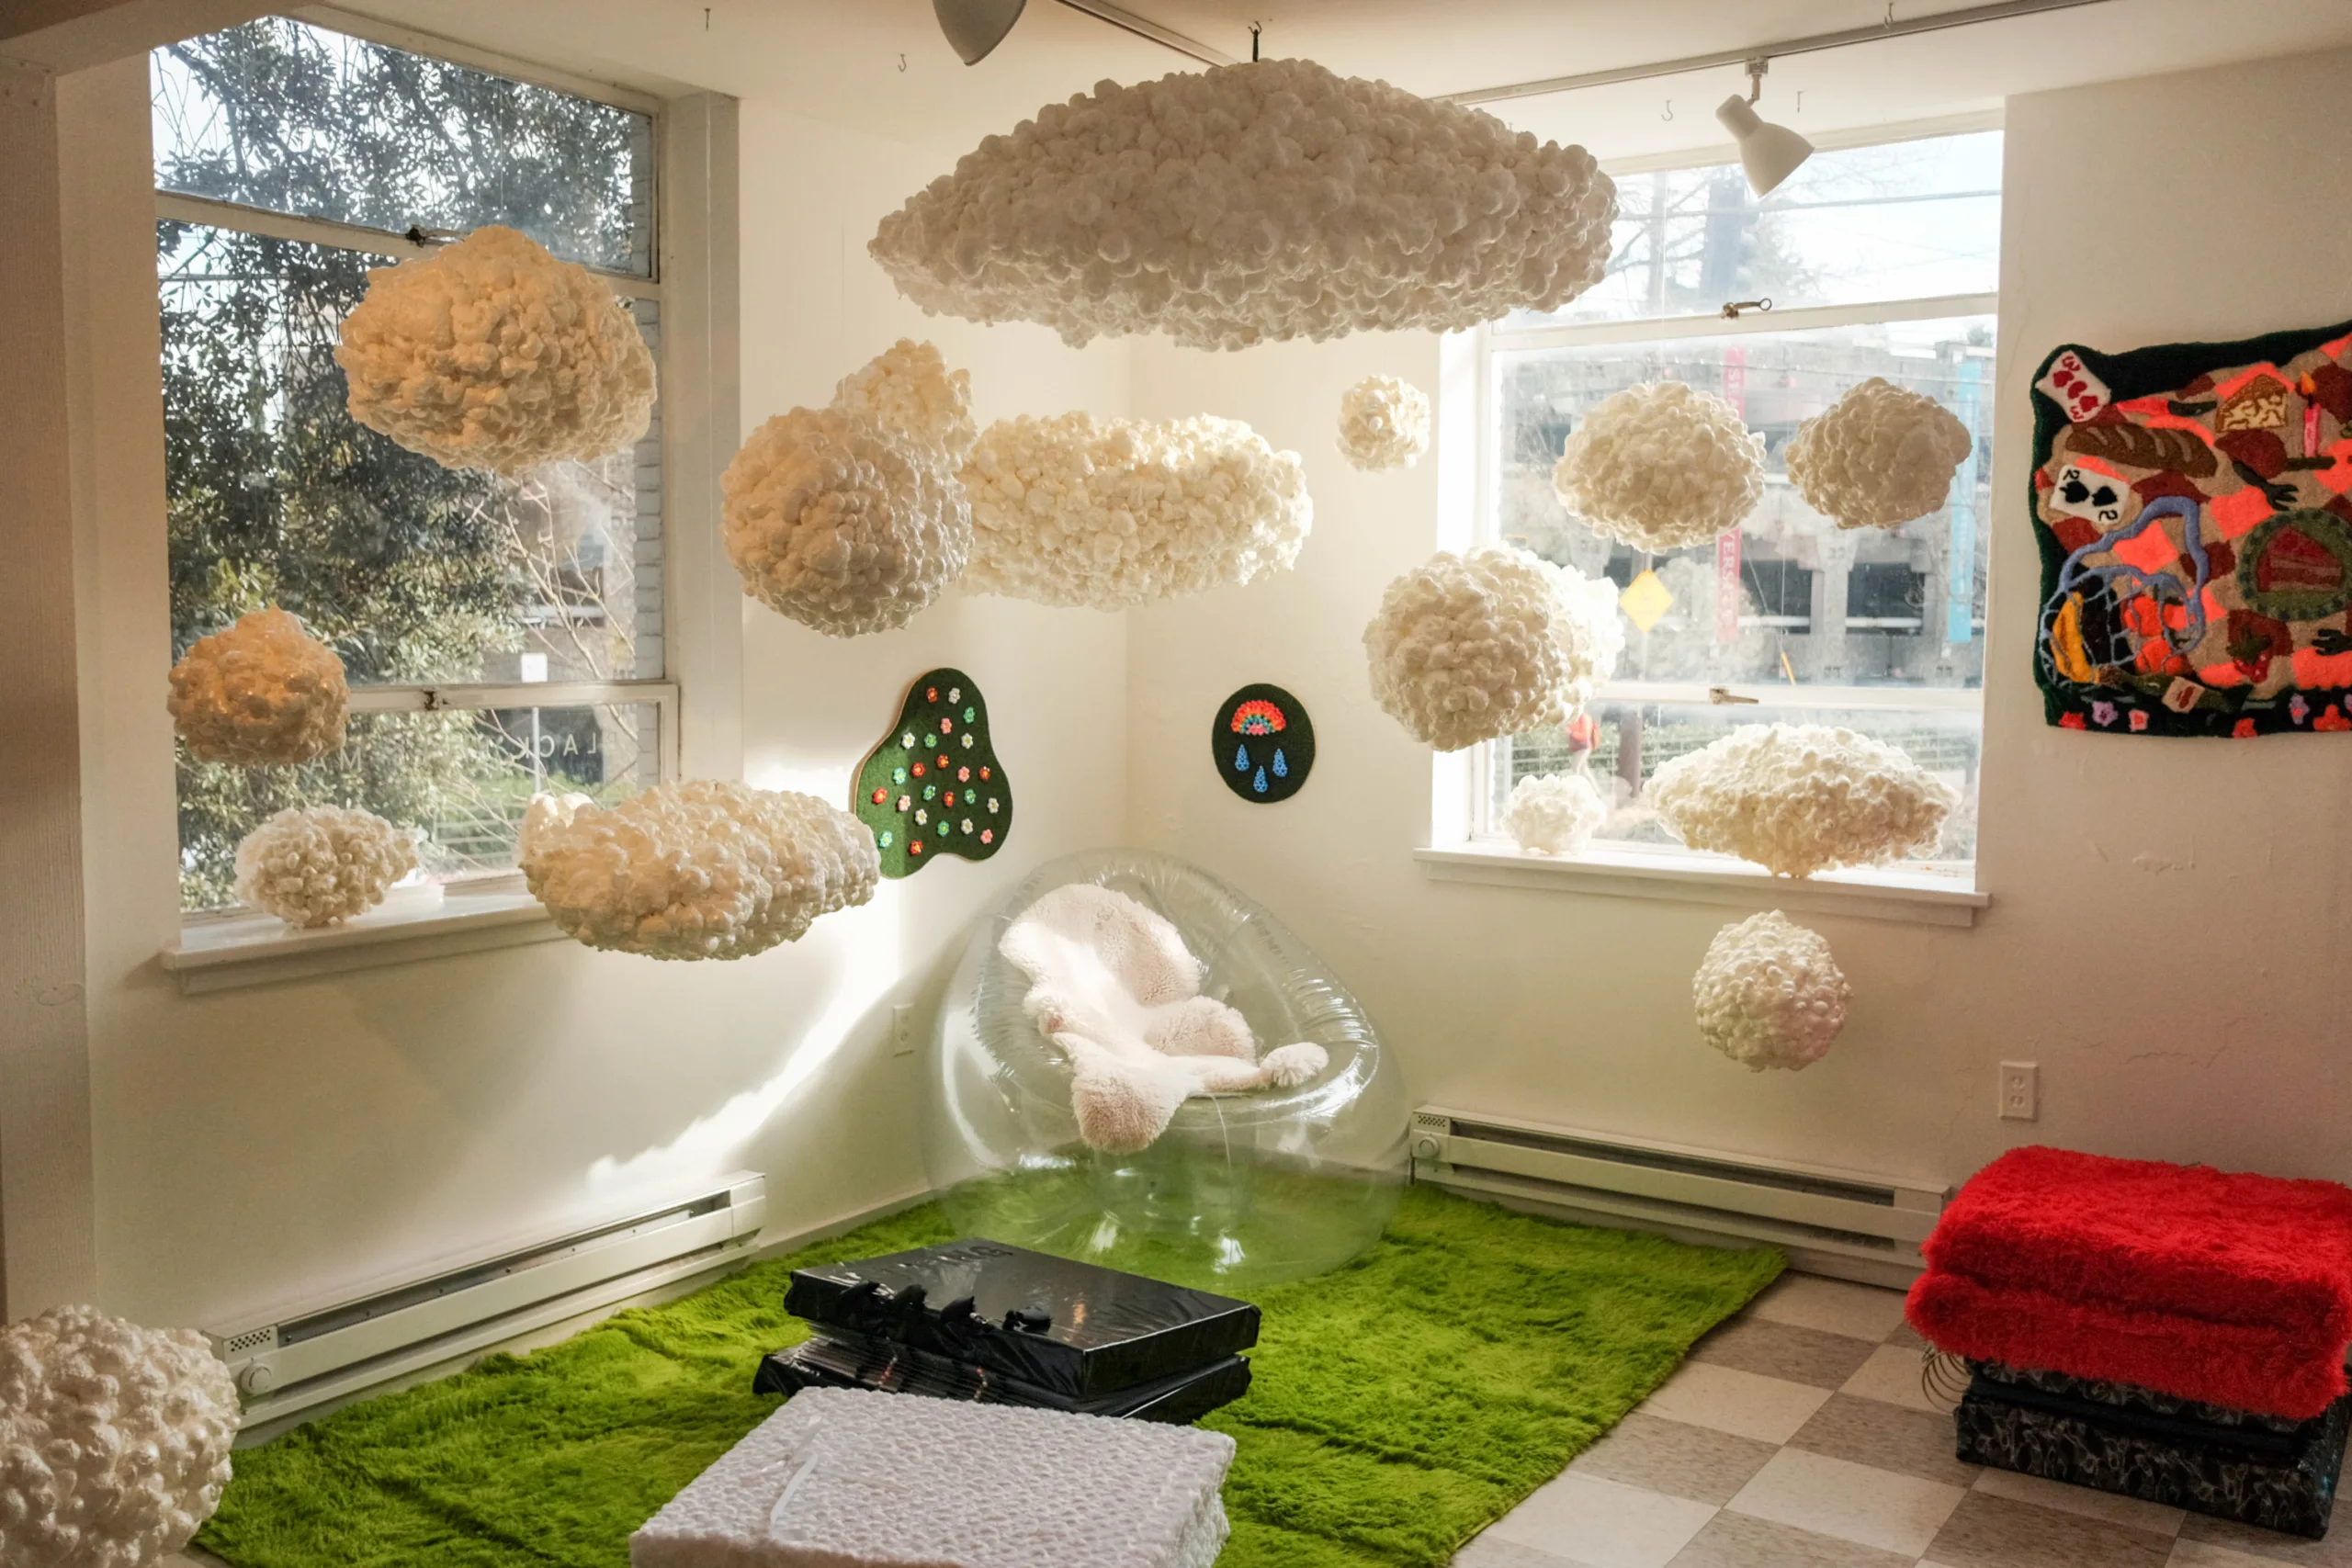 A corner room at Soft Touch in the Museum of Museums featuring an airy bean bag chair and light, white clouds made of fabric floating around it.